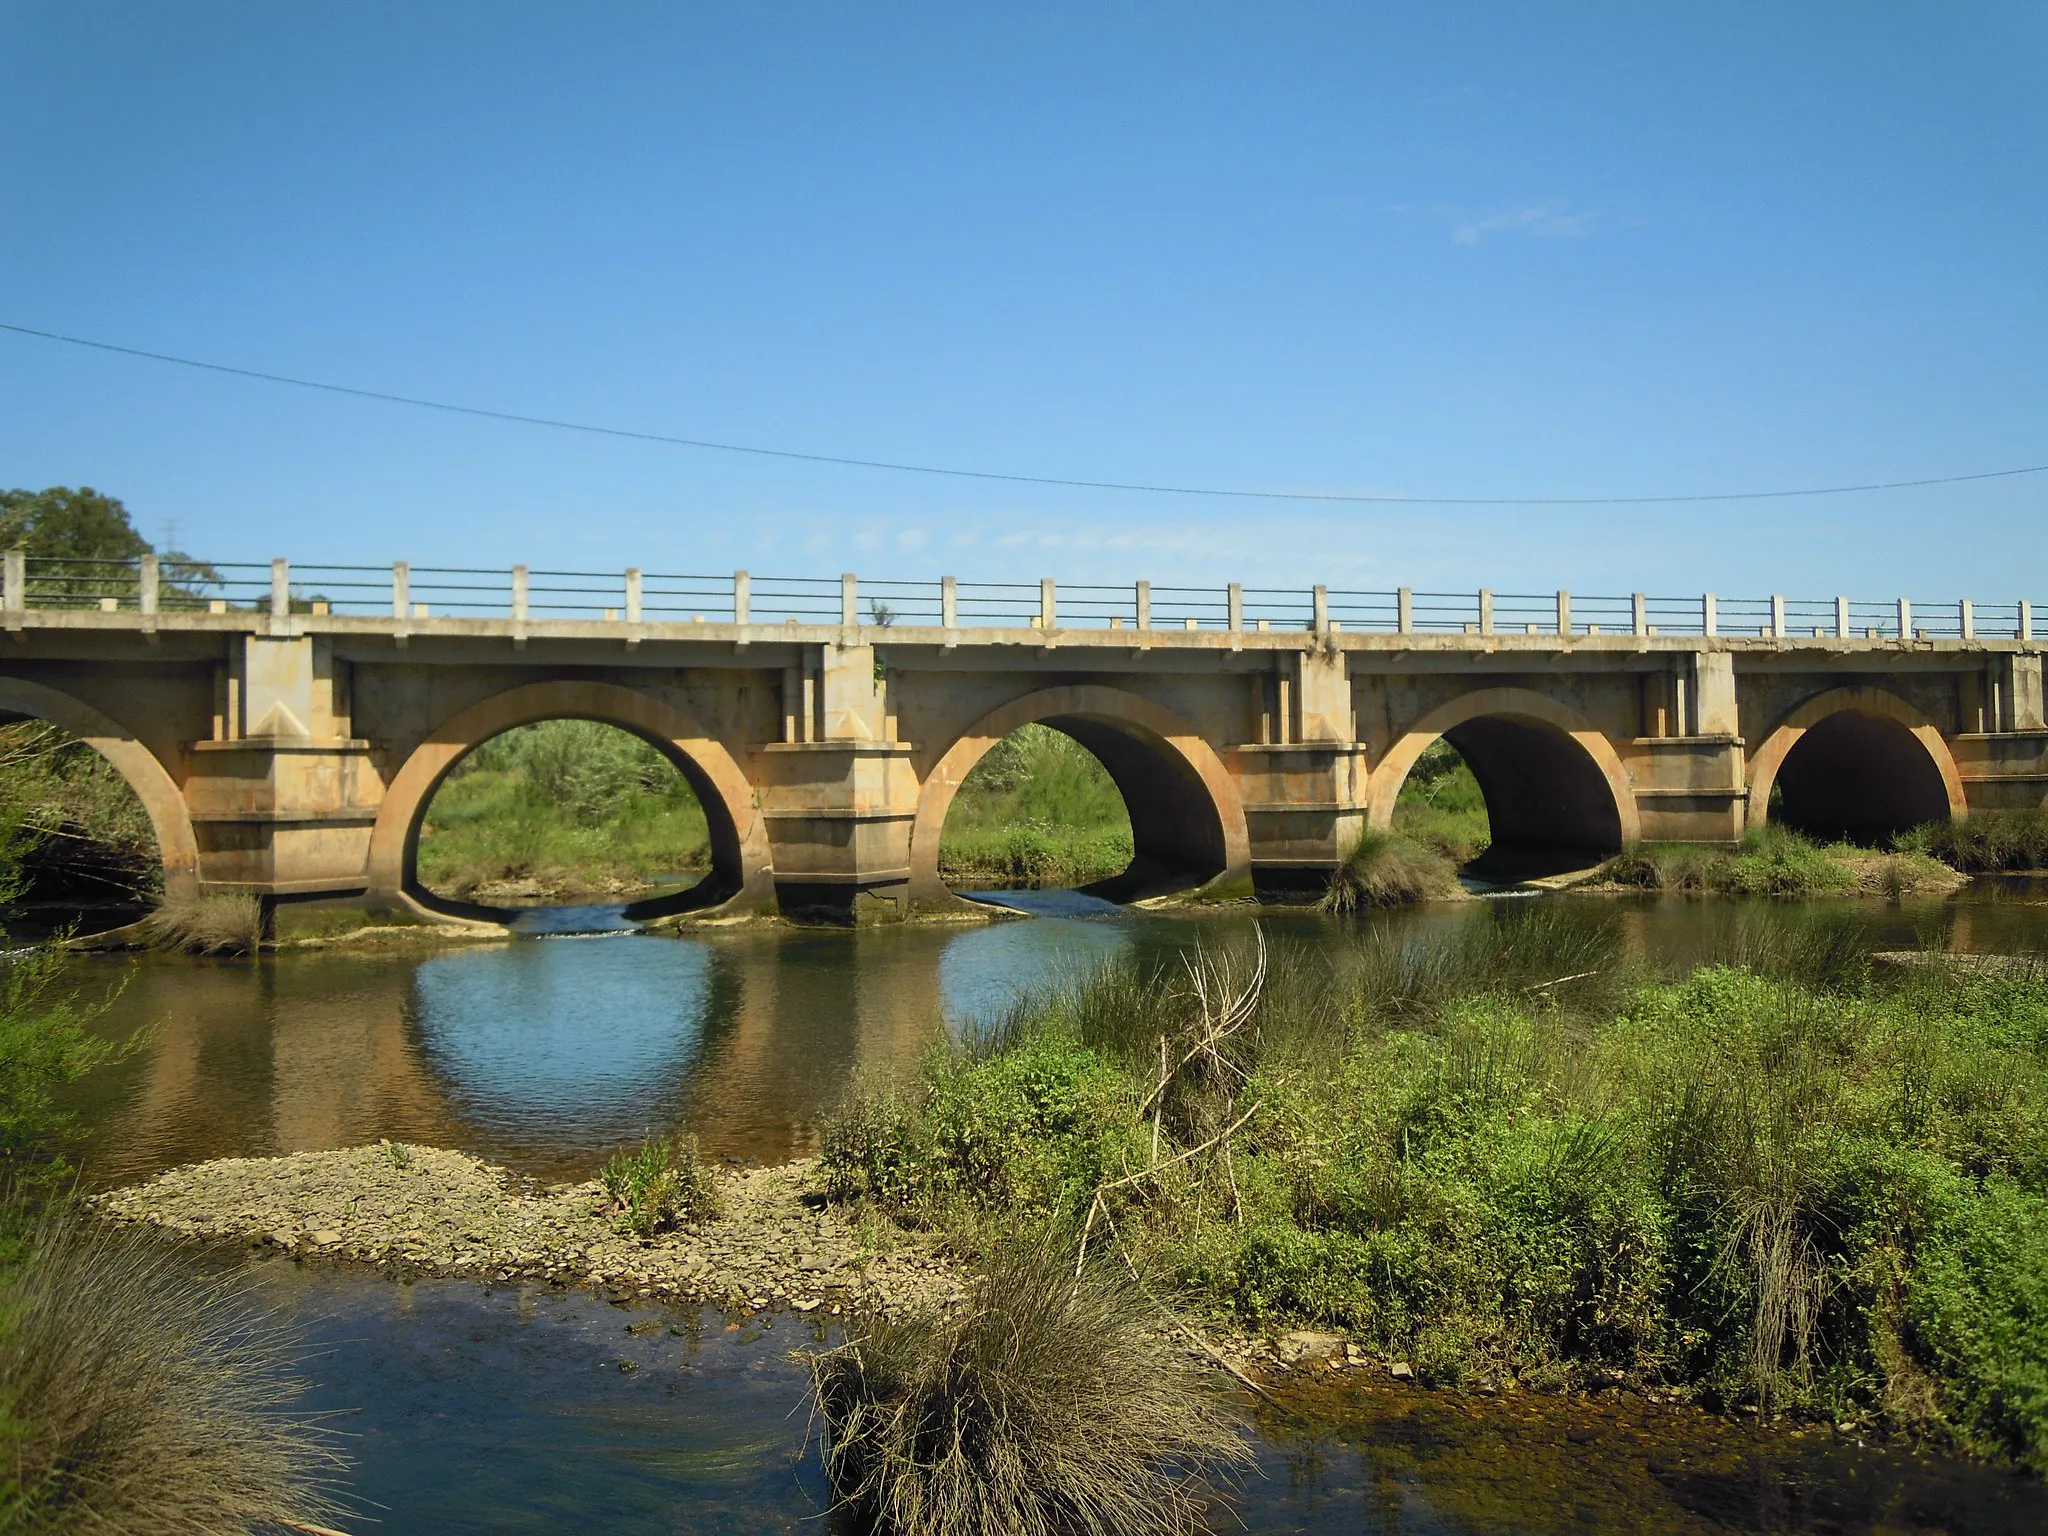 Photo showing: A road Bridge which carrys the N 124 road over the Odelouca River close to the village of Odelouca, Algarve, Portugal.